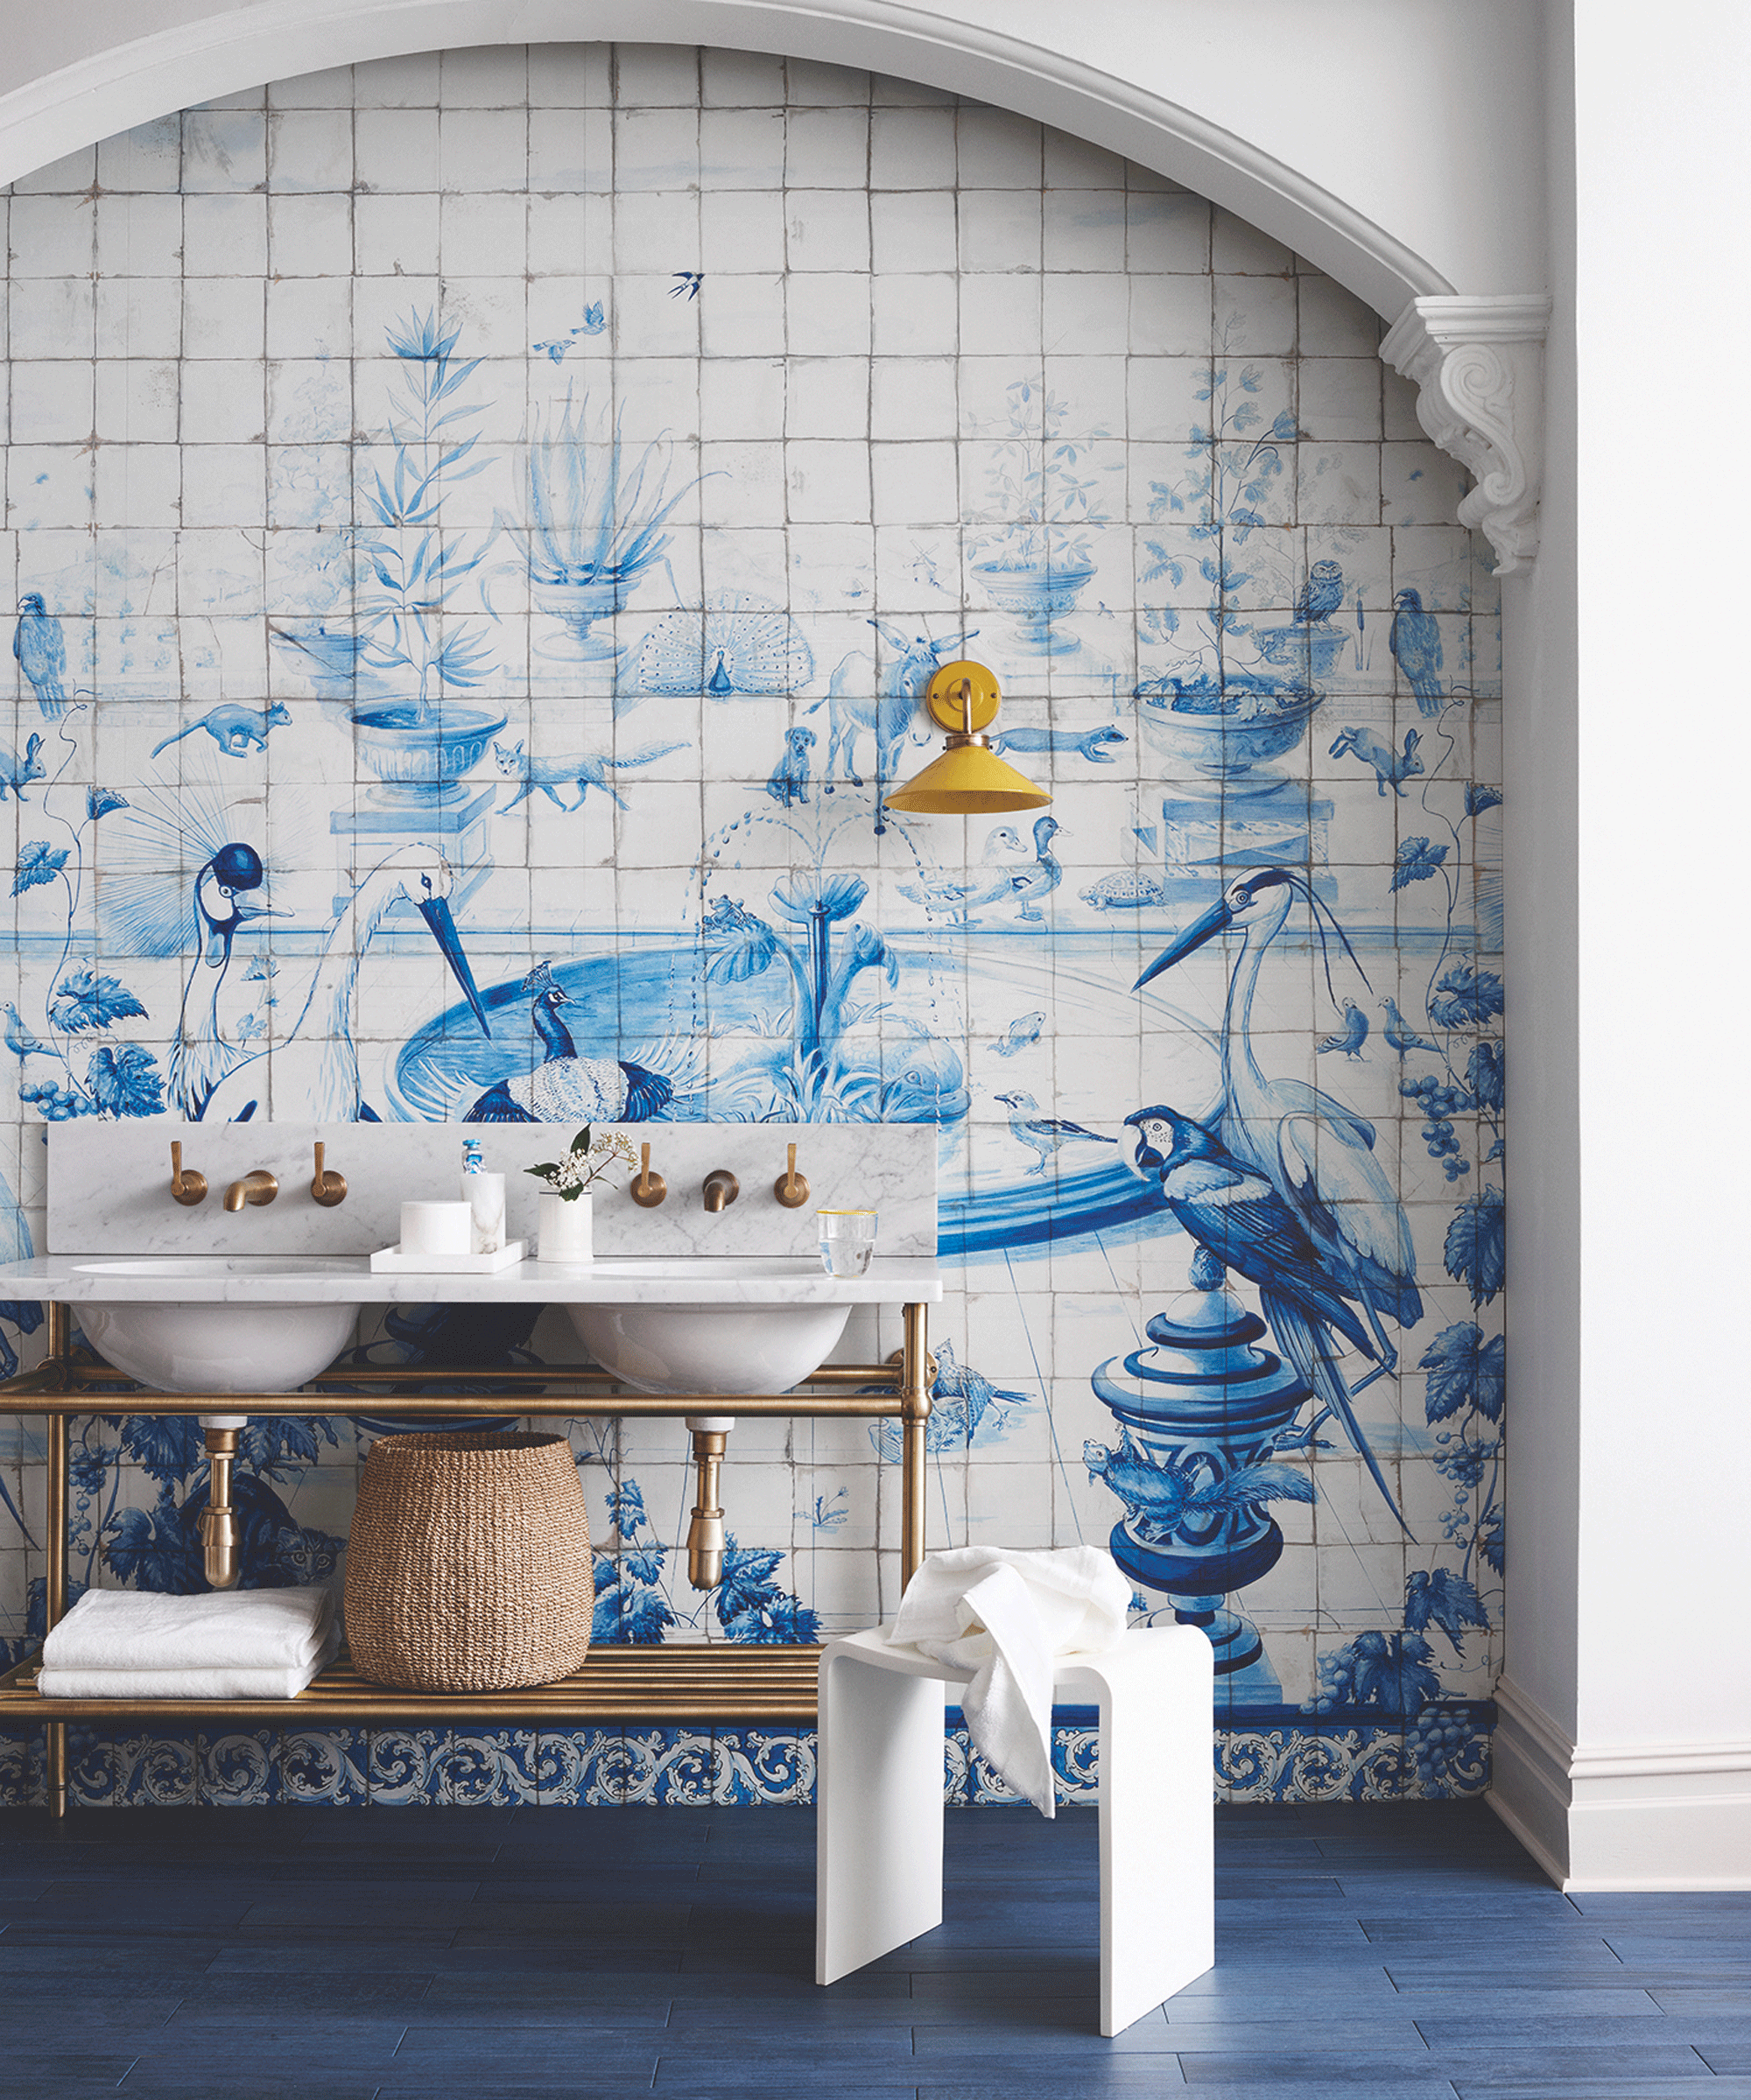 Blue and white statement tile-effect wallpaper behind a double vanity unit with white sinks and gold taps